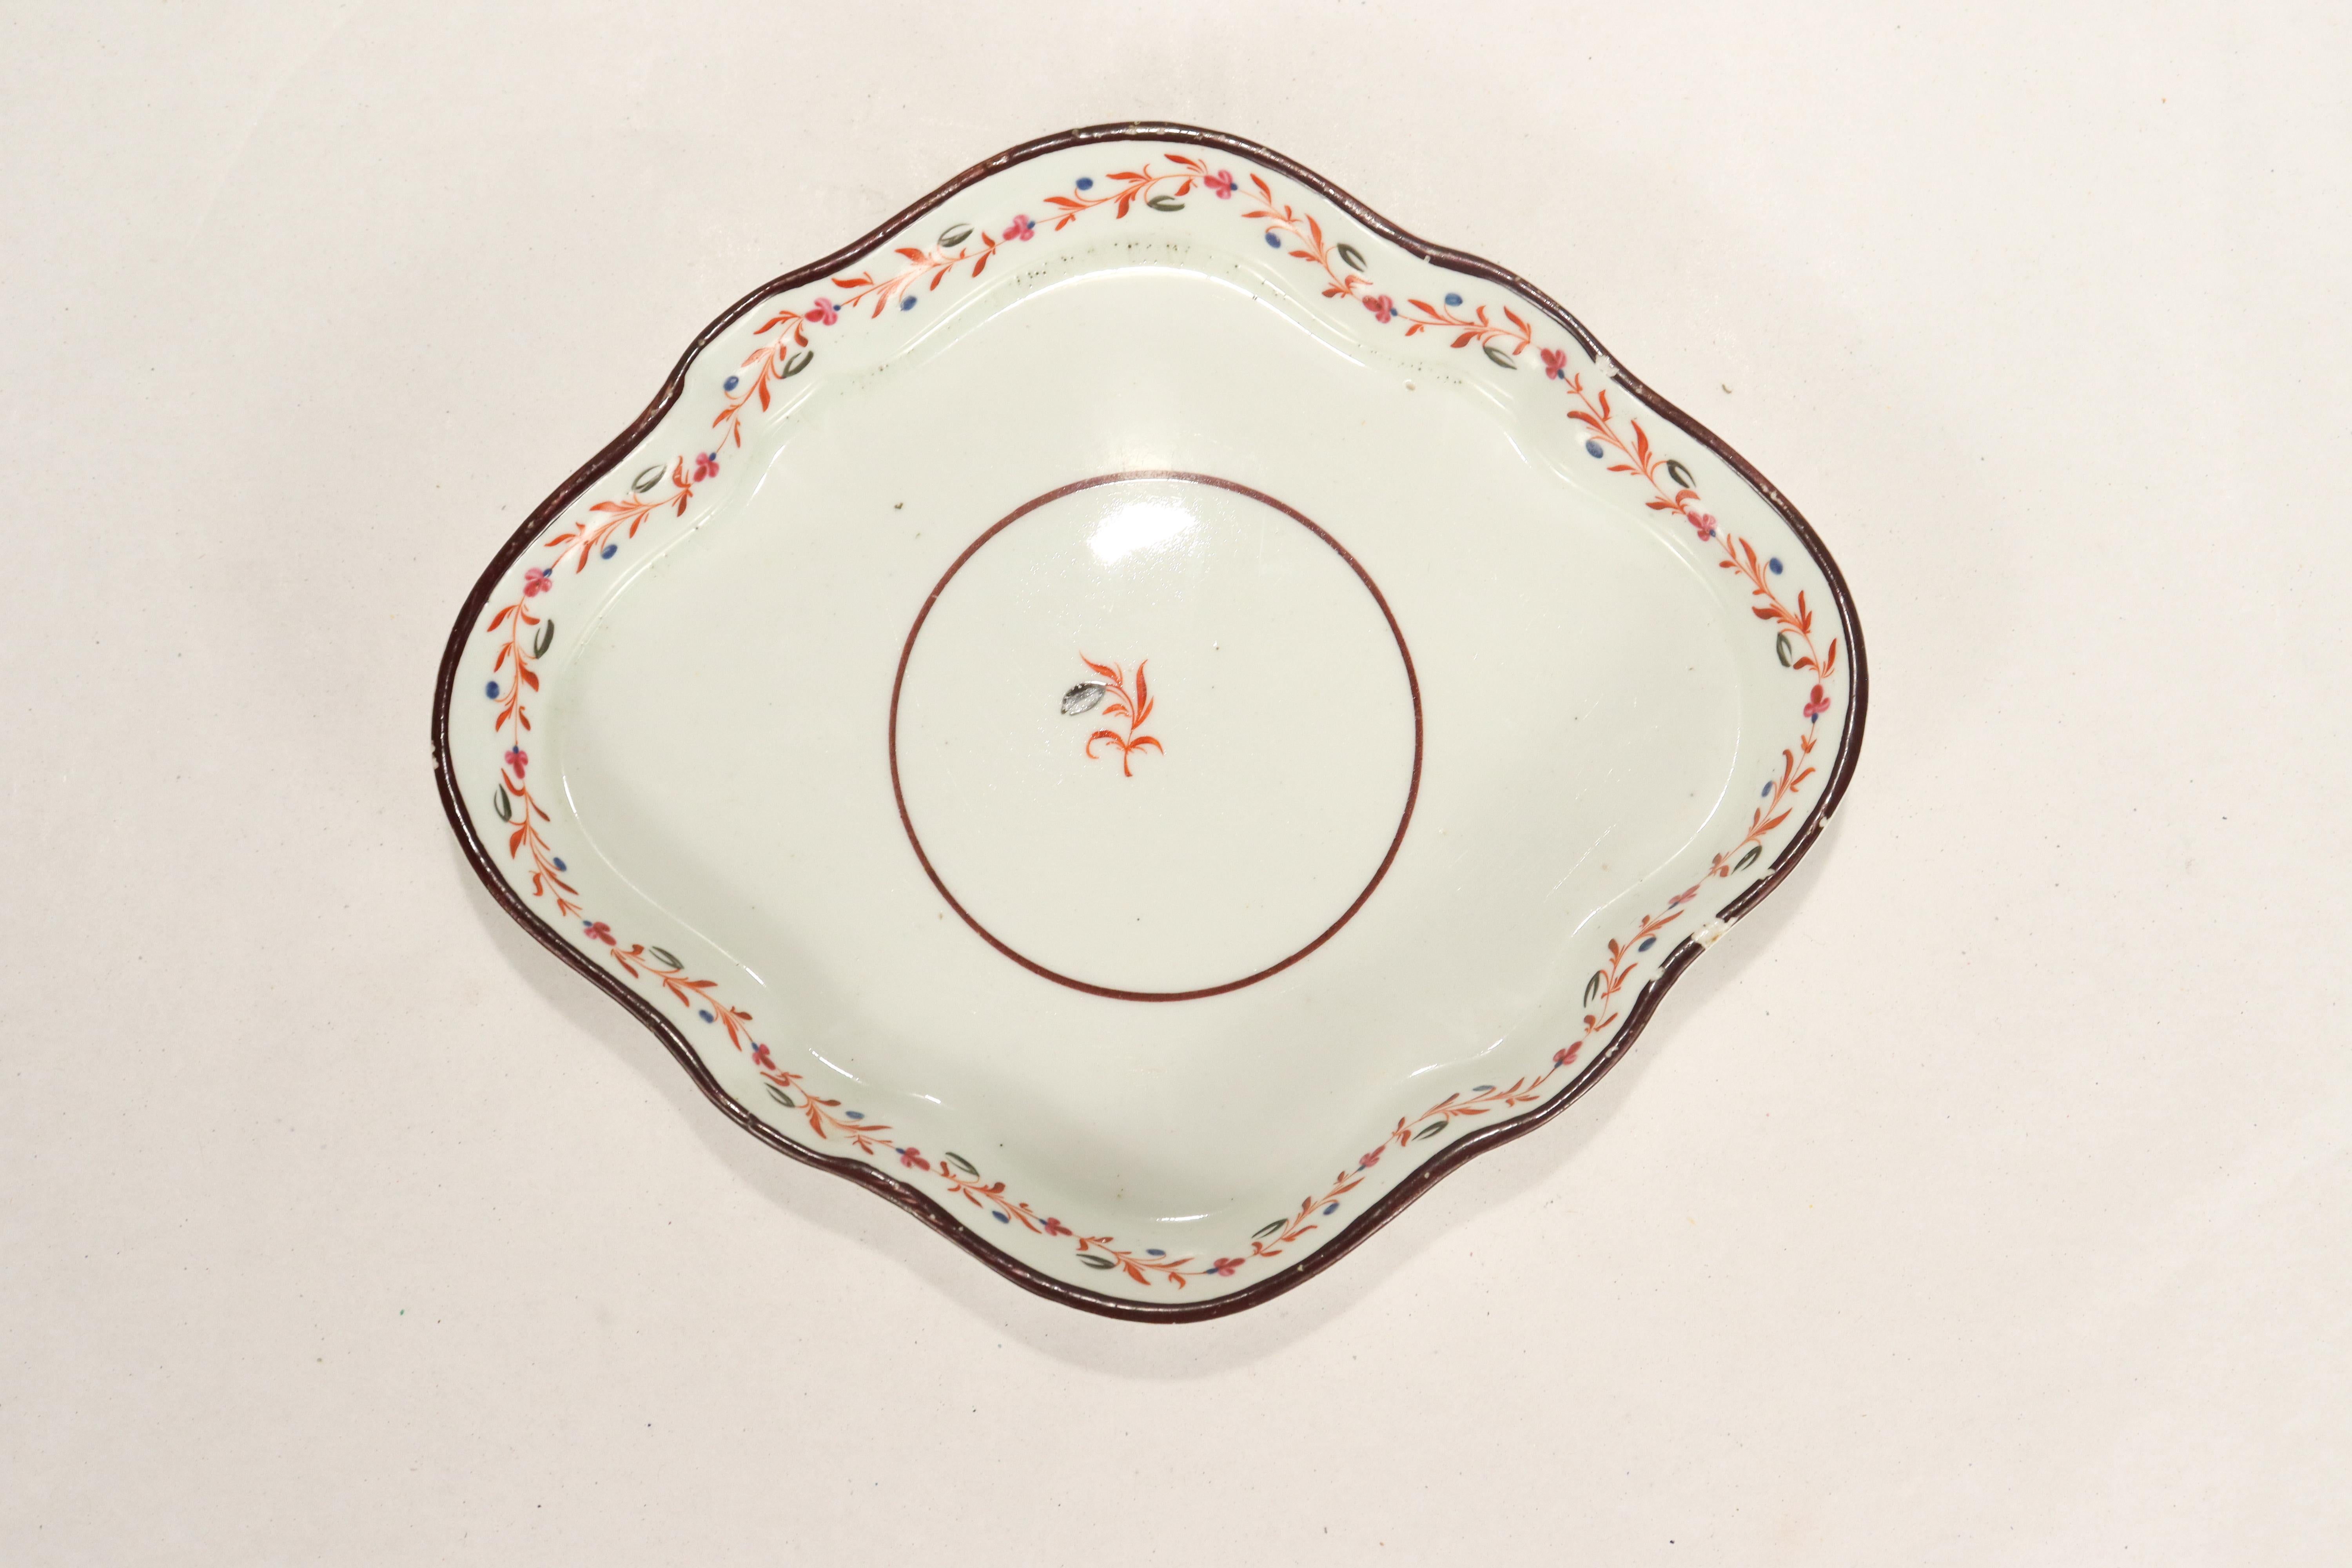 A fine antique English porcelain teapot trivet. 

Attributed to New Hall.

In a diamond-shaped form.

With a single red & black floral sprig inside of a circle to the center. The rim is decorated with a floral garland and a brown painted edge.